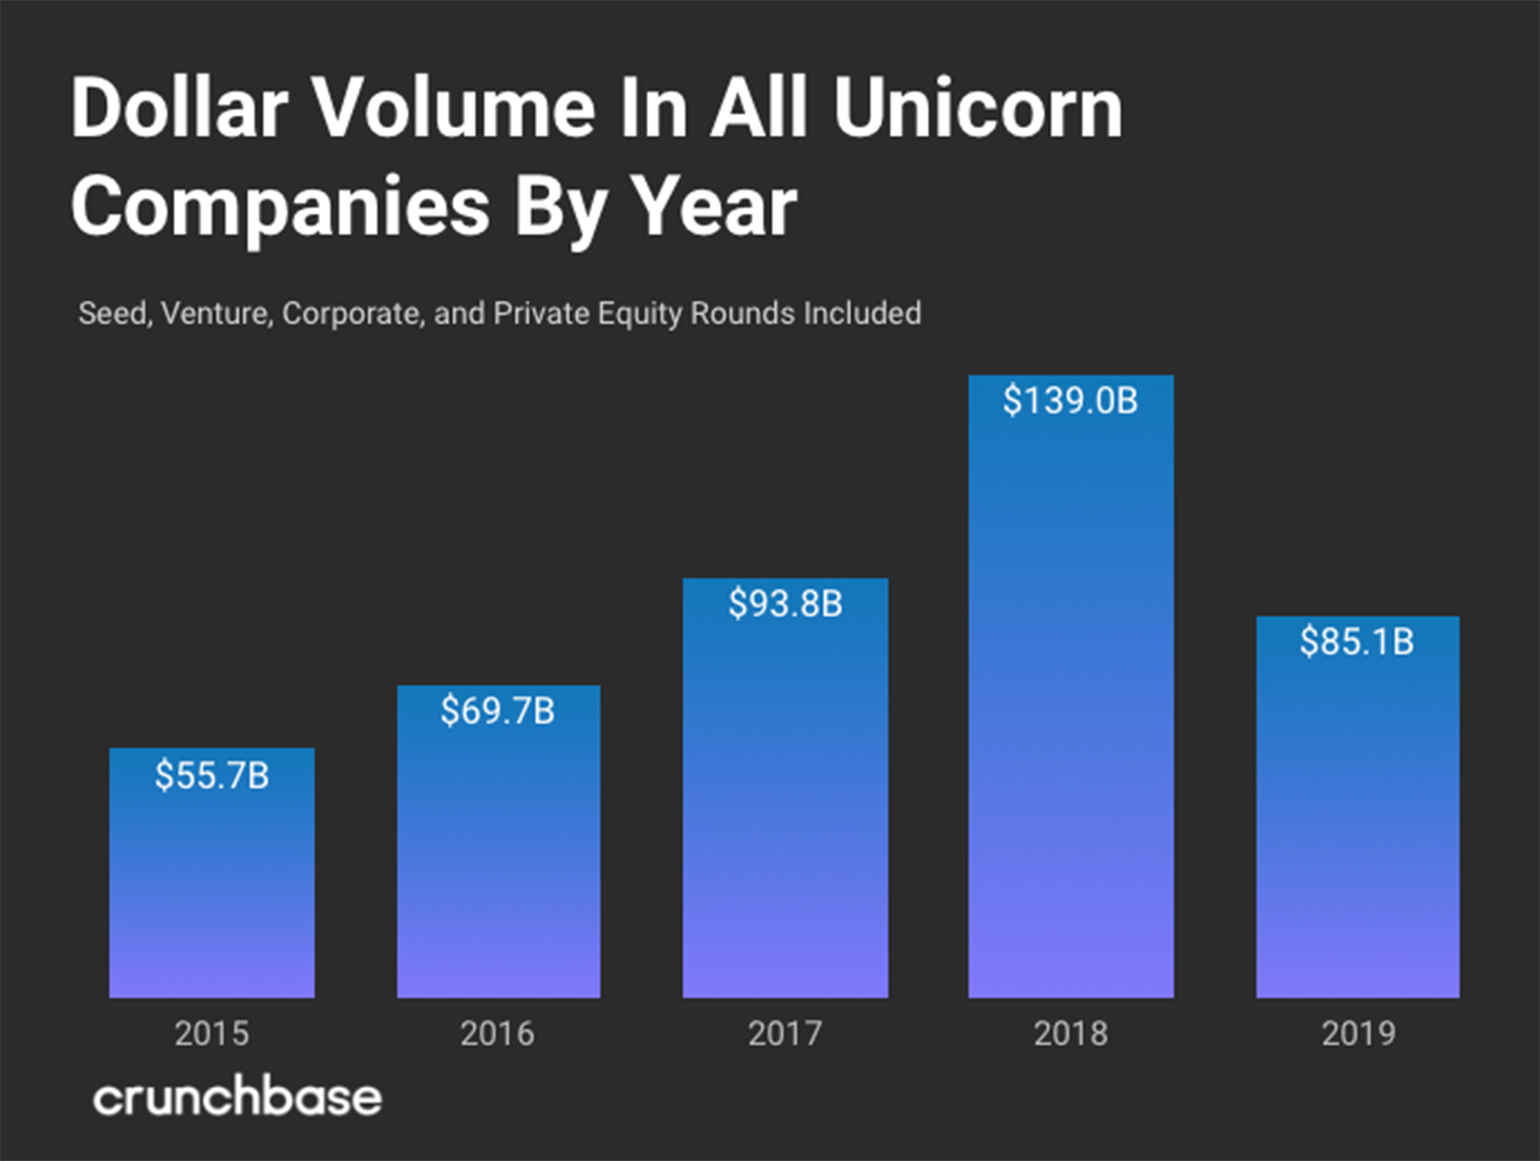 The Growth Of New Unicorns In 2019 Is Higher Than Previous Years-Body Image 18